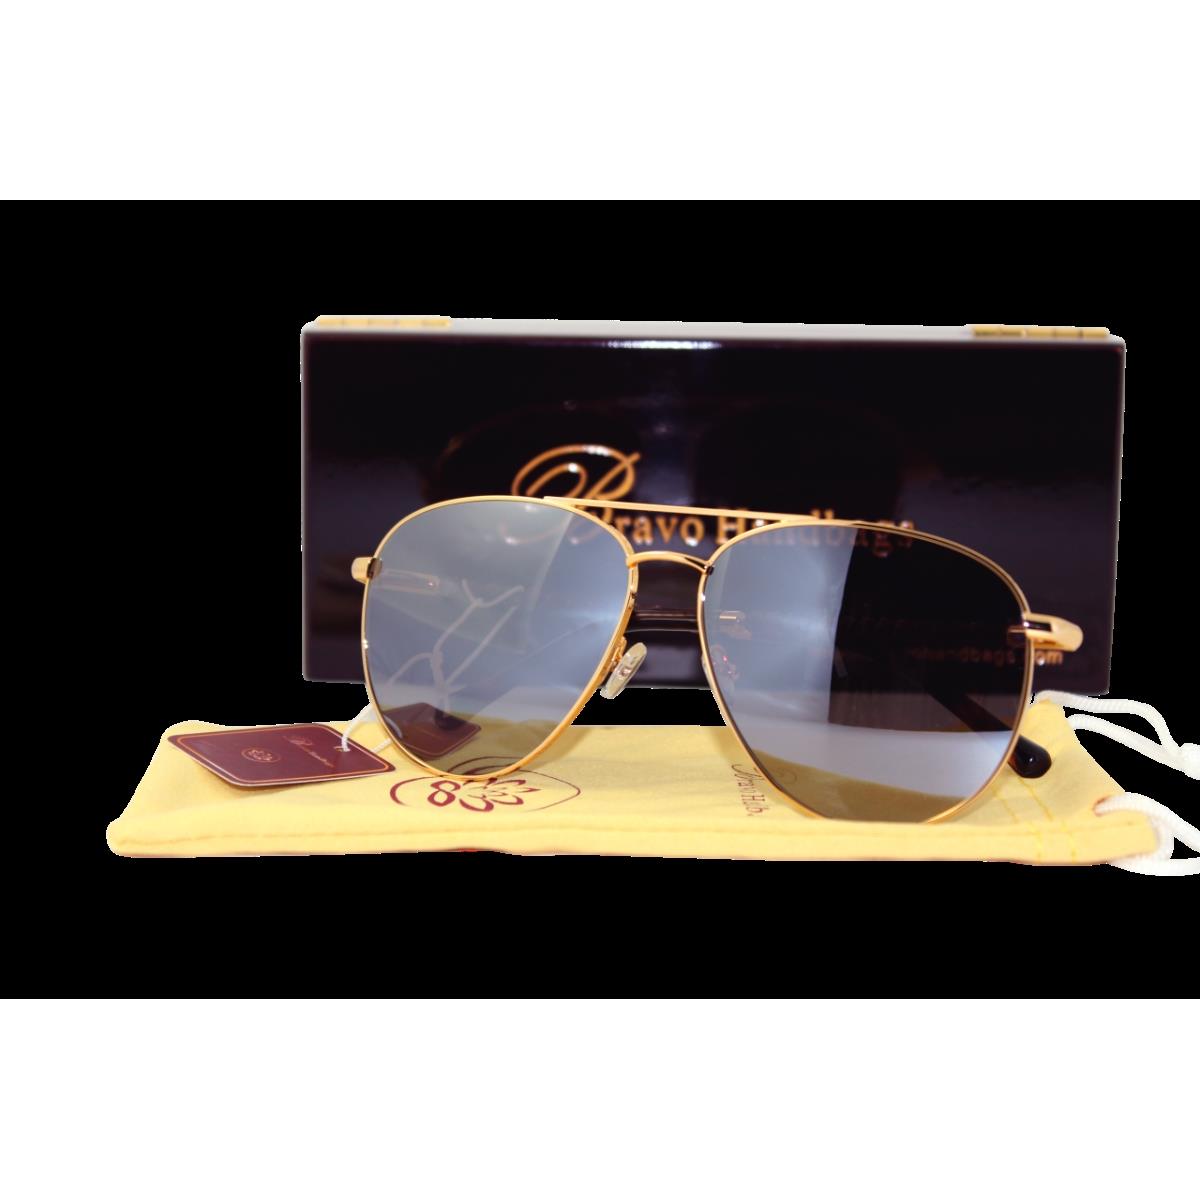 Picture of Bravo Handbags BV1802 C2 Metal Color 18K Gold Sunglasses - Gold Lens, 60-14 by 140